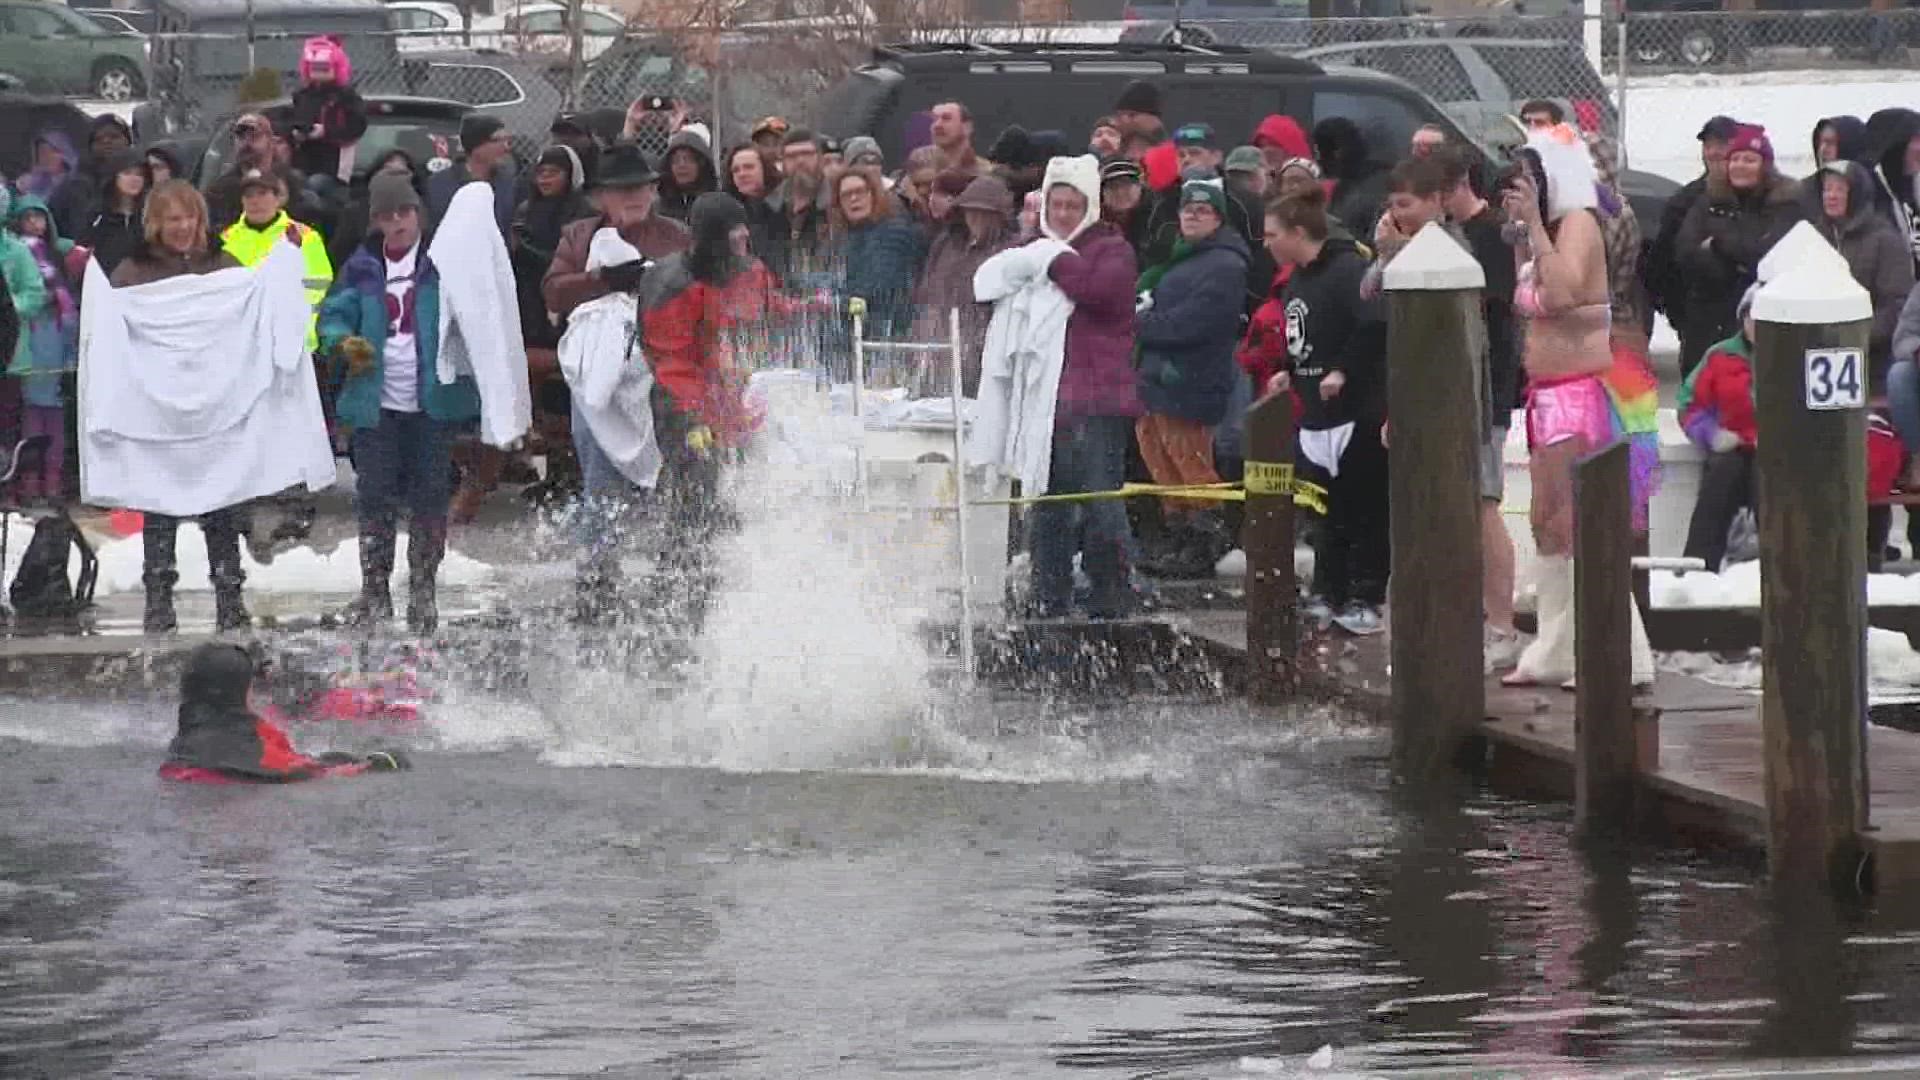 The polar plunge in Muskegon is one of the few in the state, where you can actually jump into a lake. Plungers will be jumping into Muskegon Lake on March 19.